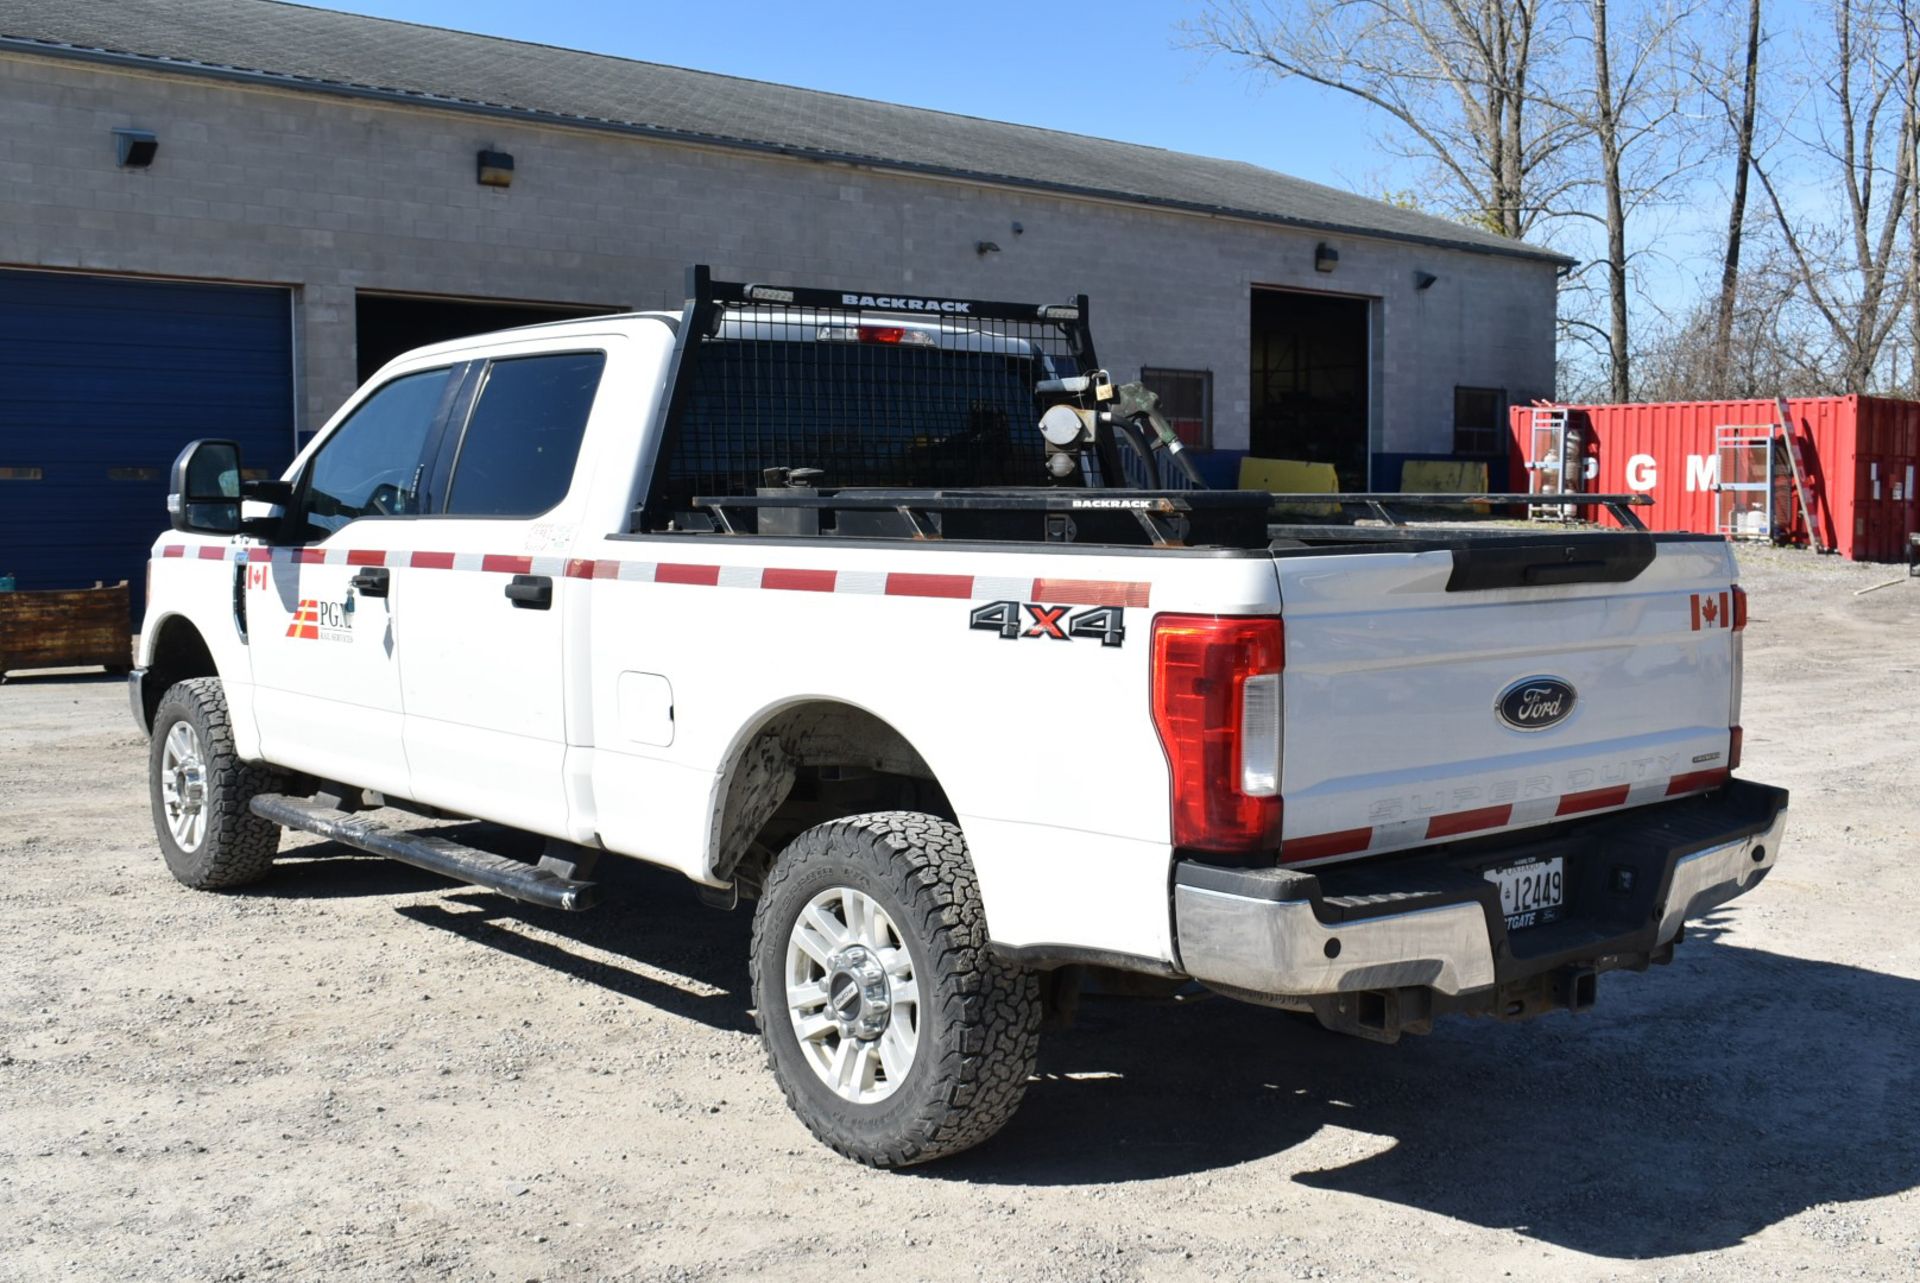 FORD (2017) F250 XLT SUPER DUTY CREW CAB PICKUP TRUCK WITH 6.2L 8 CYL. GAS ENGINE, AUTO. - Image 2 of 15